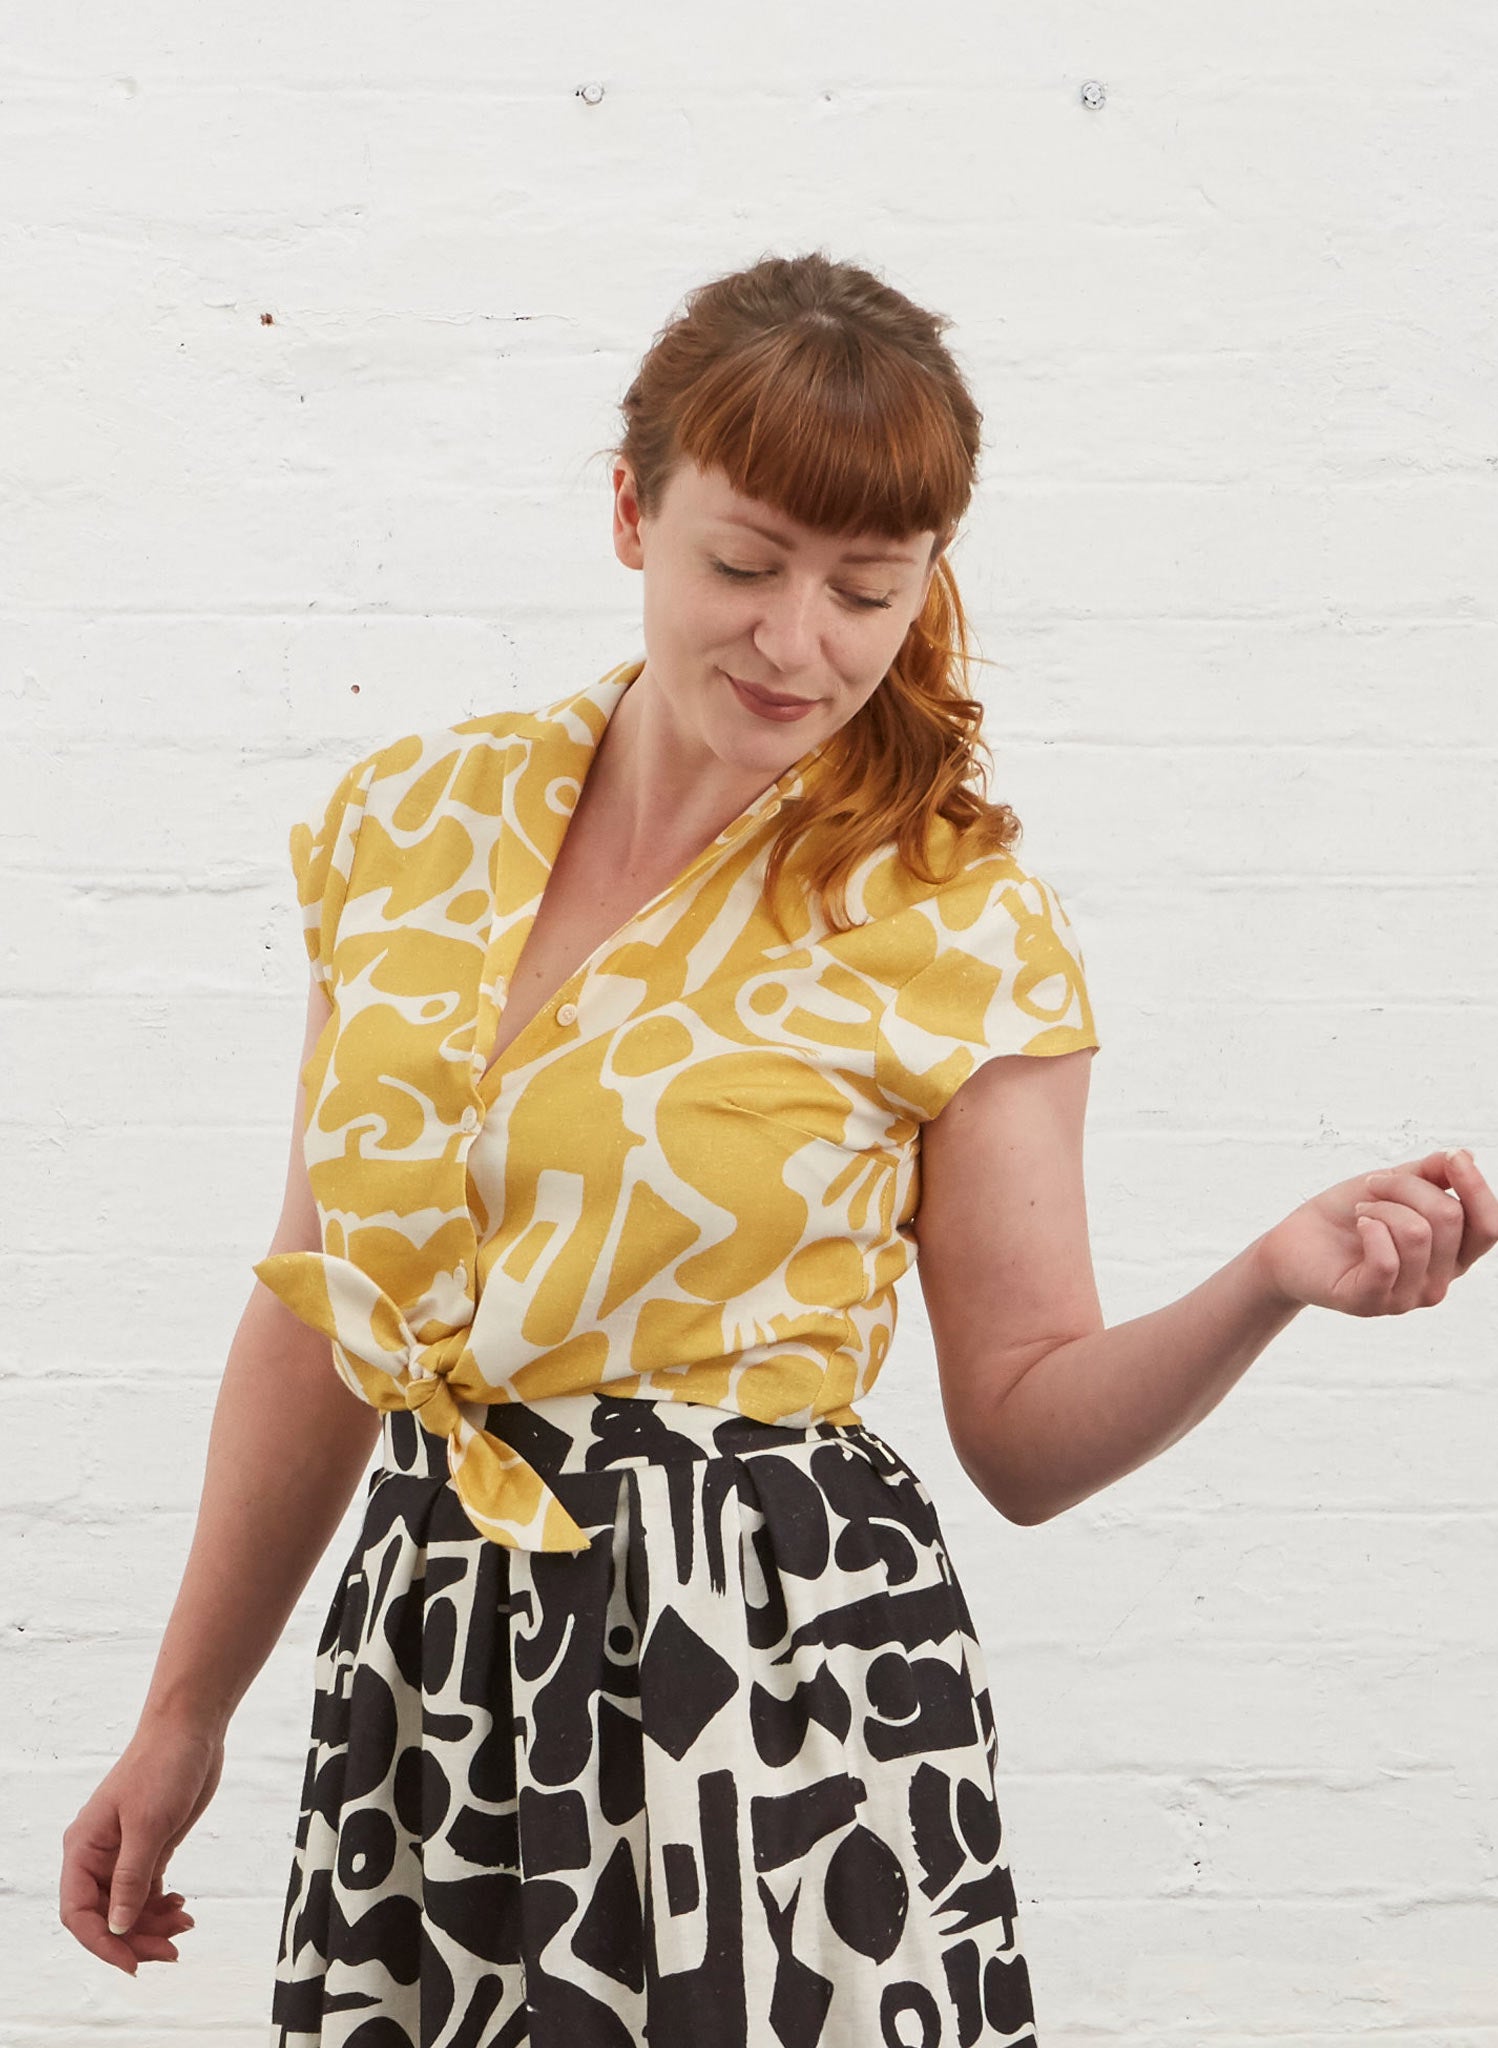 Photo of Alison ( fringed auburn hair )wearing a cropped tie waist button up blouse with yellow and white abstract shape fabric. Also wearing black and white Ada skirt in same pattern.